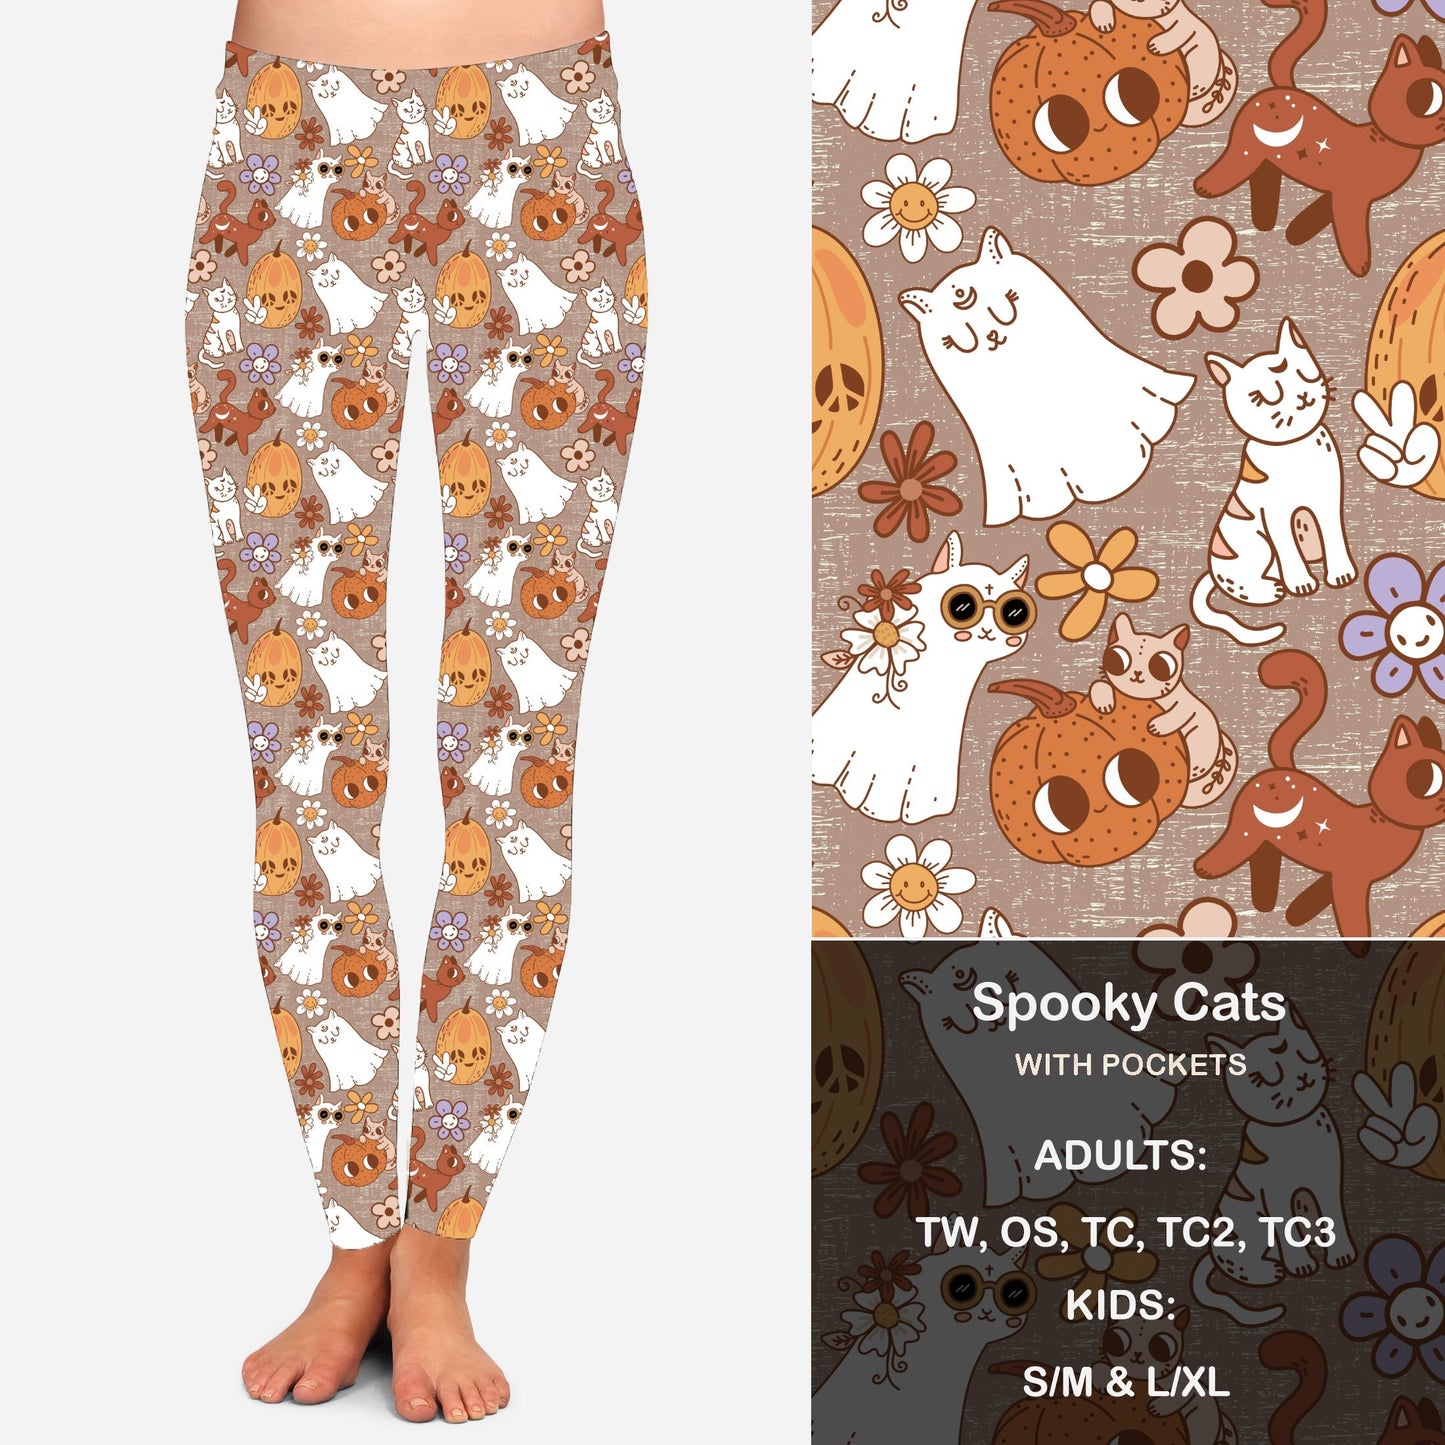 Spooky Cats Leggings with Pockets